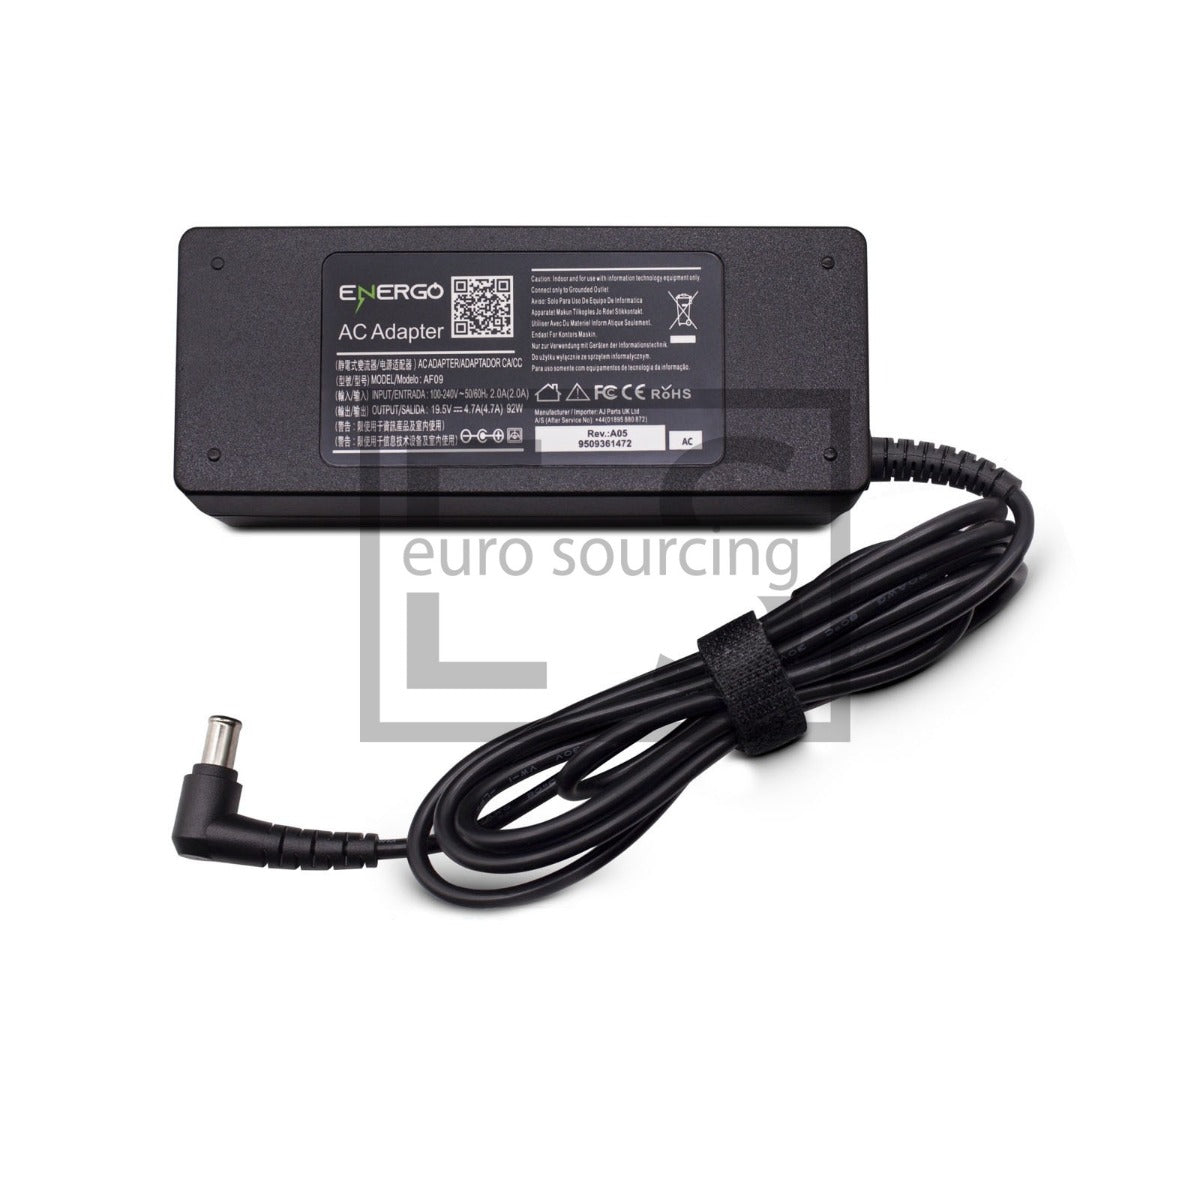 New Replacement For 19.5V 4.7A Centre Pin 90W 6.5 MM X 4.4 MM Laptop Power Adapter Compatible With SONY VAIO SVE111A11M